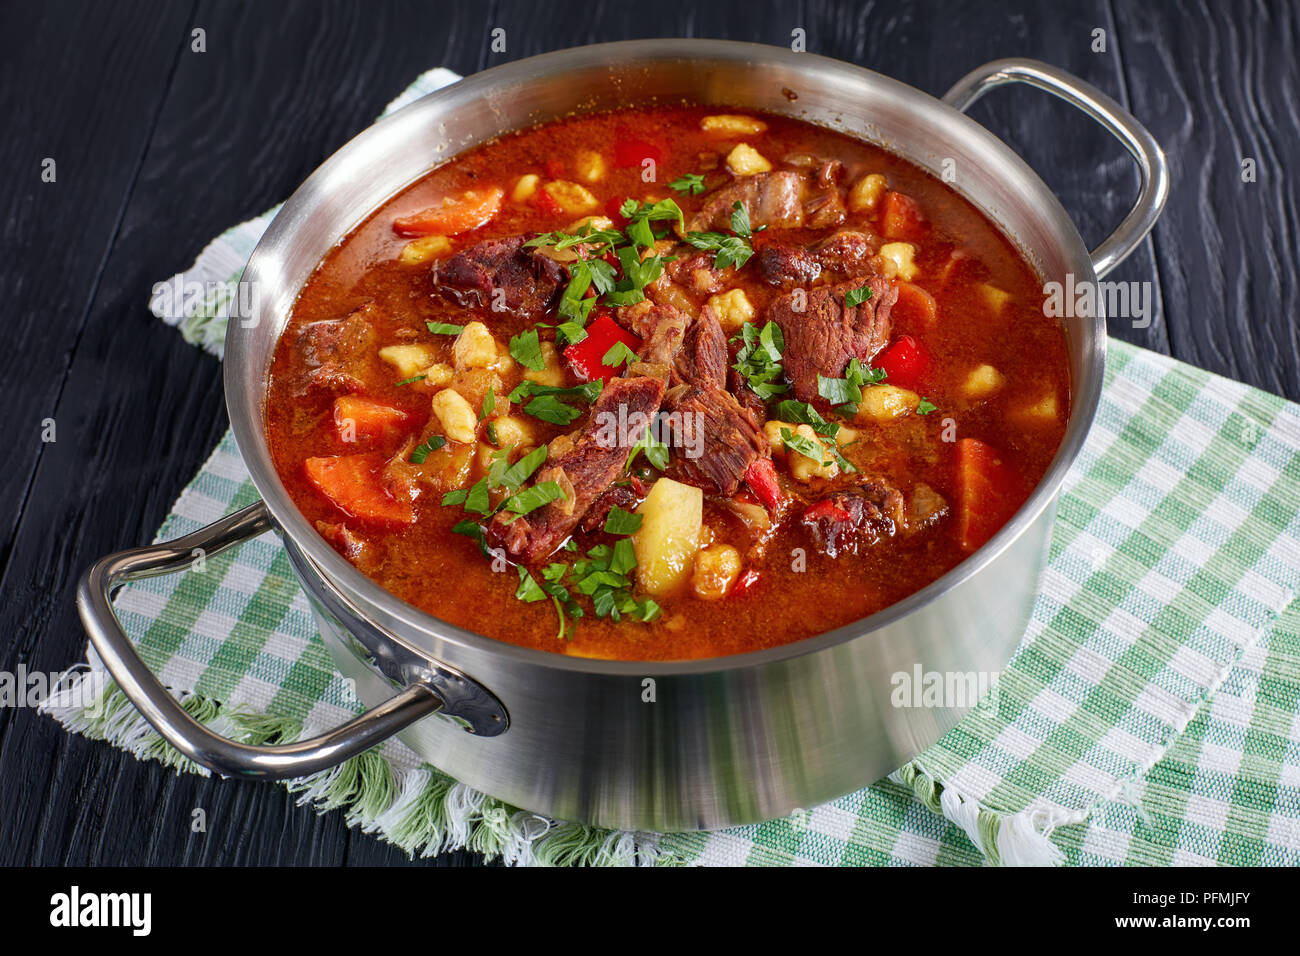 delicious hot hungarian goulash with beef meat, paprika, vegetables and csipetke - small egg pasta in stainless steel pot on black wooden table, class Stock Photo